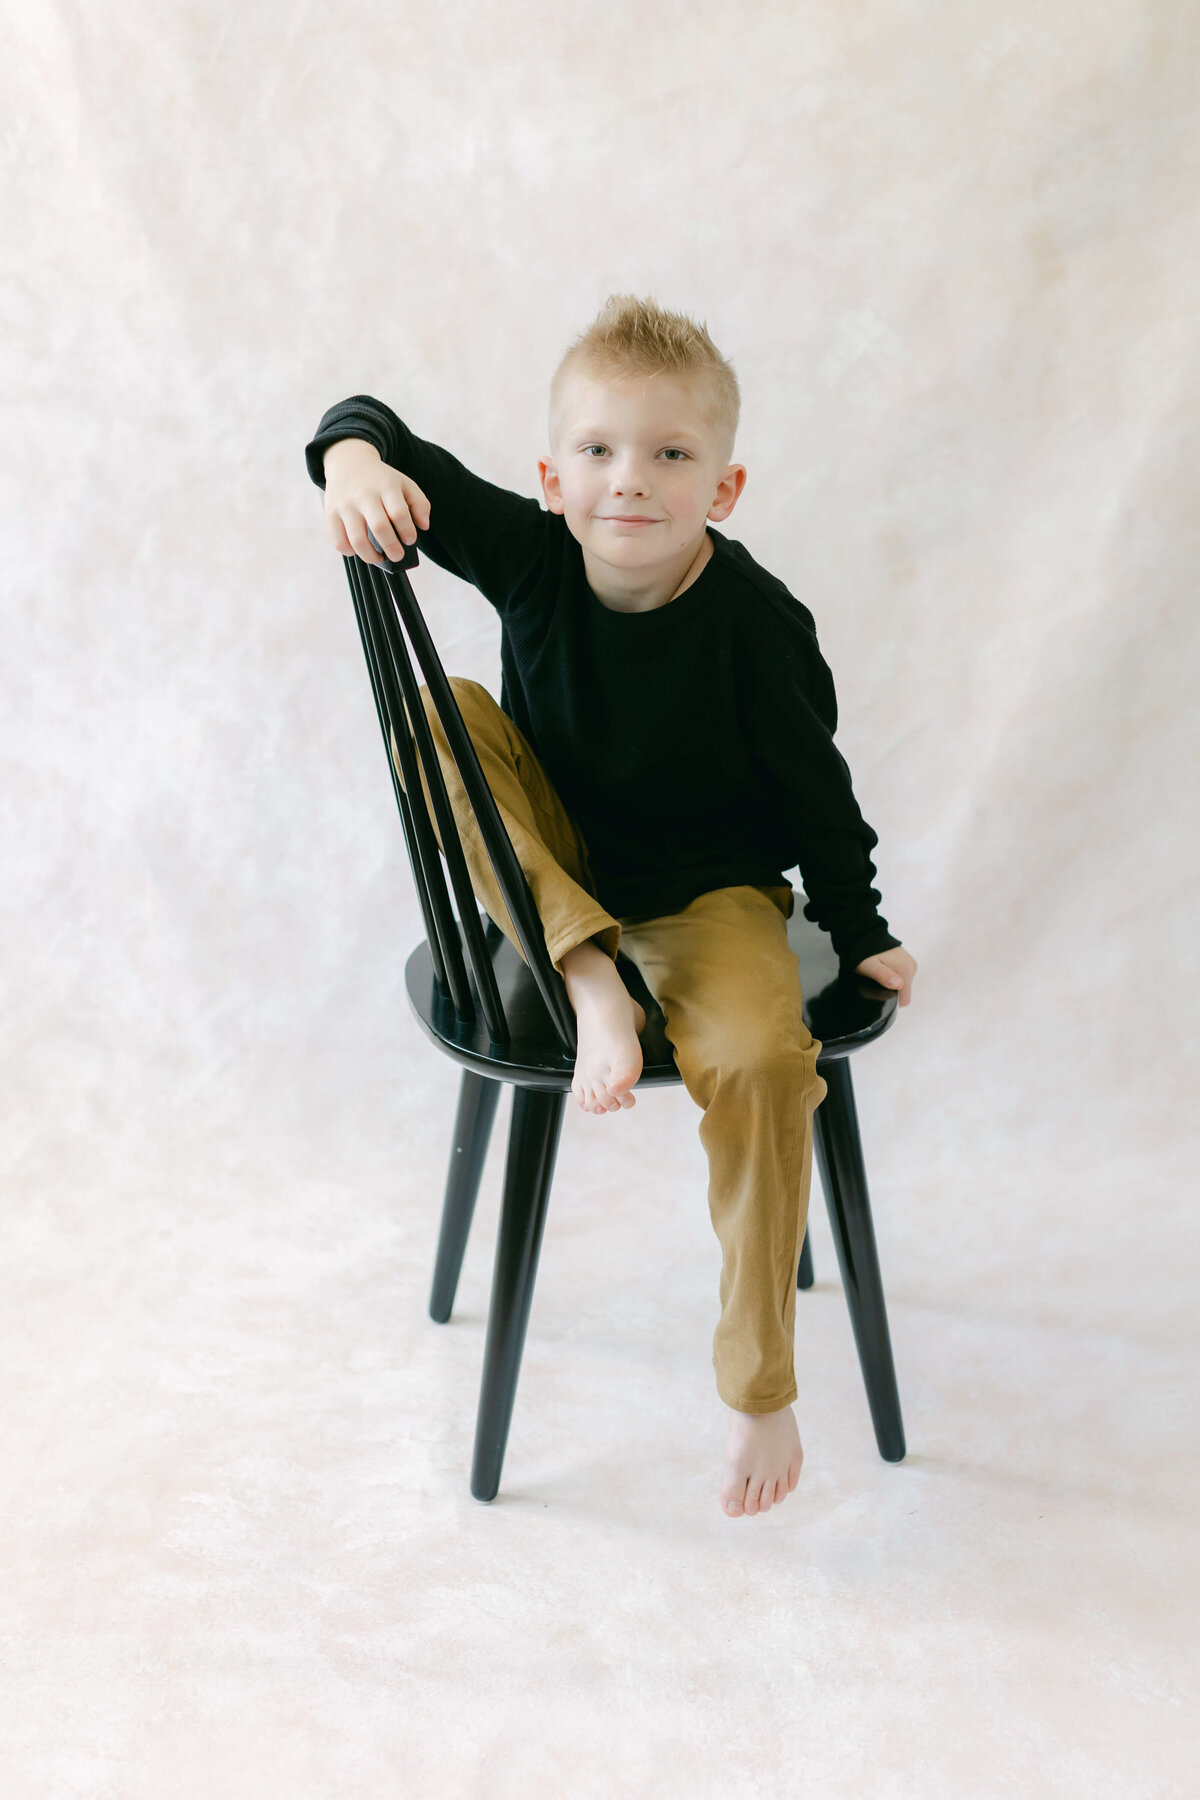 A young boy smiles while sitting in a black chair.